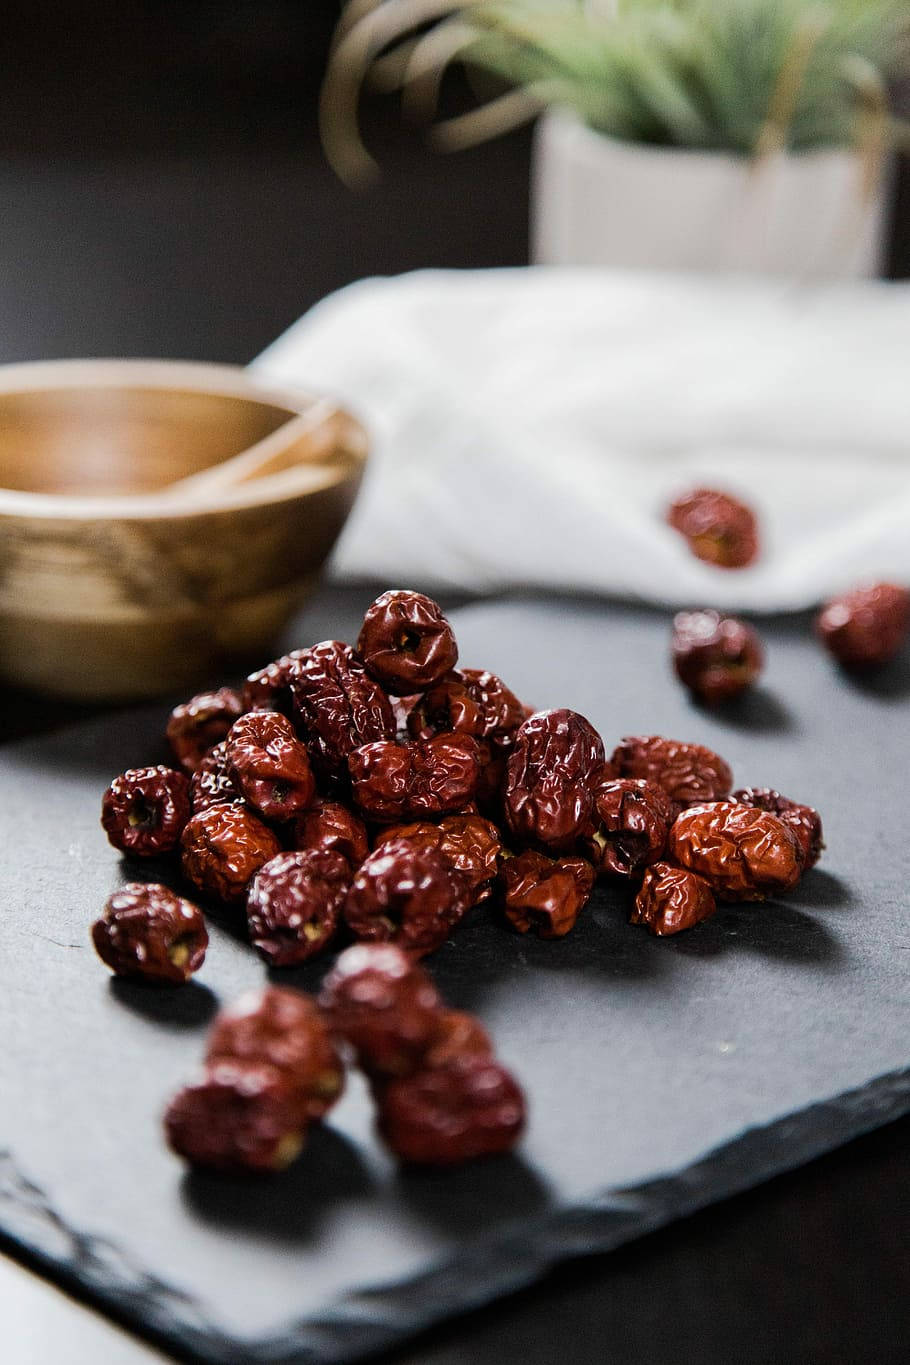 Jujube Fruit Seeds On The Table Wallpaper